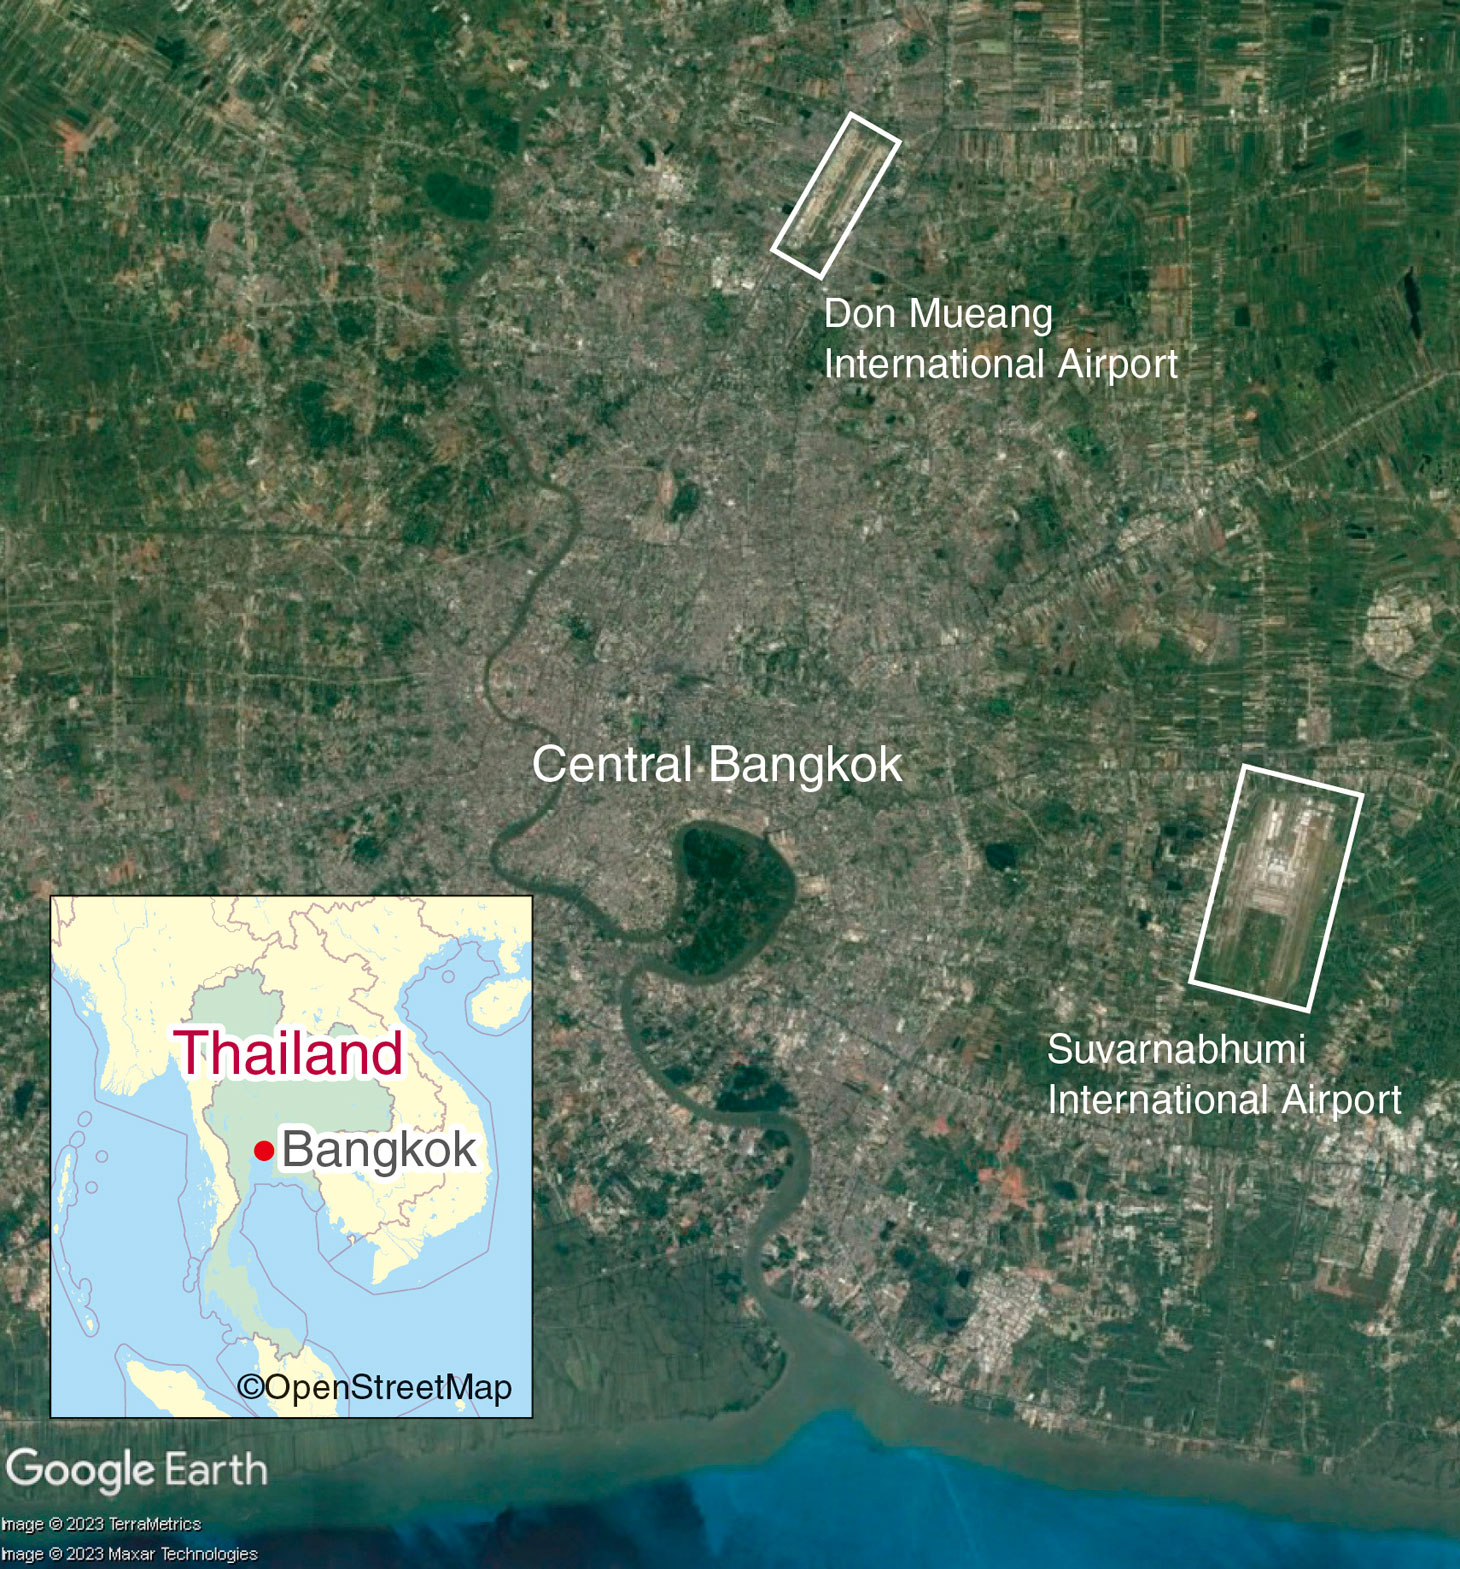 Positioning of Central Bangkok and the Airport